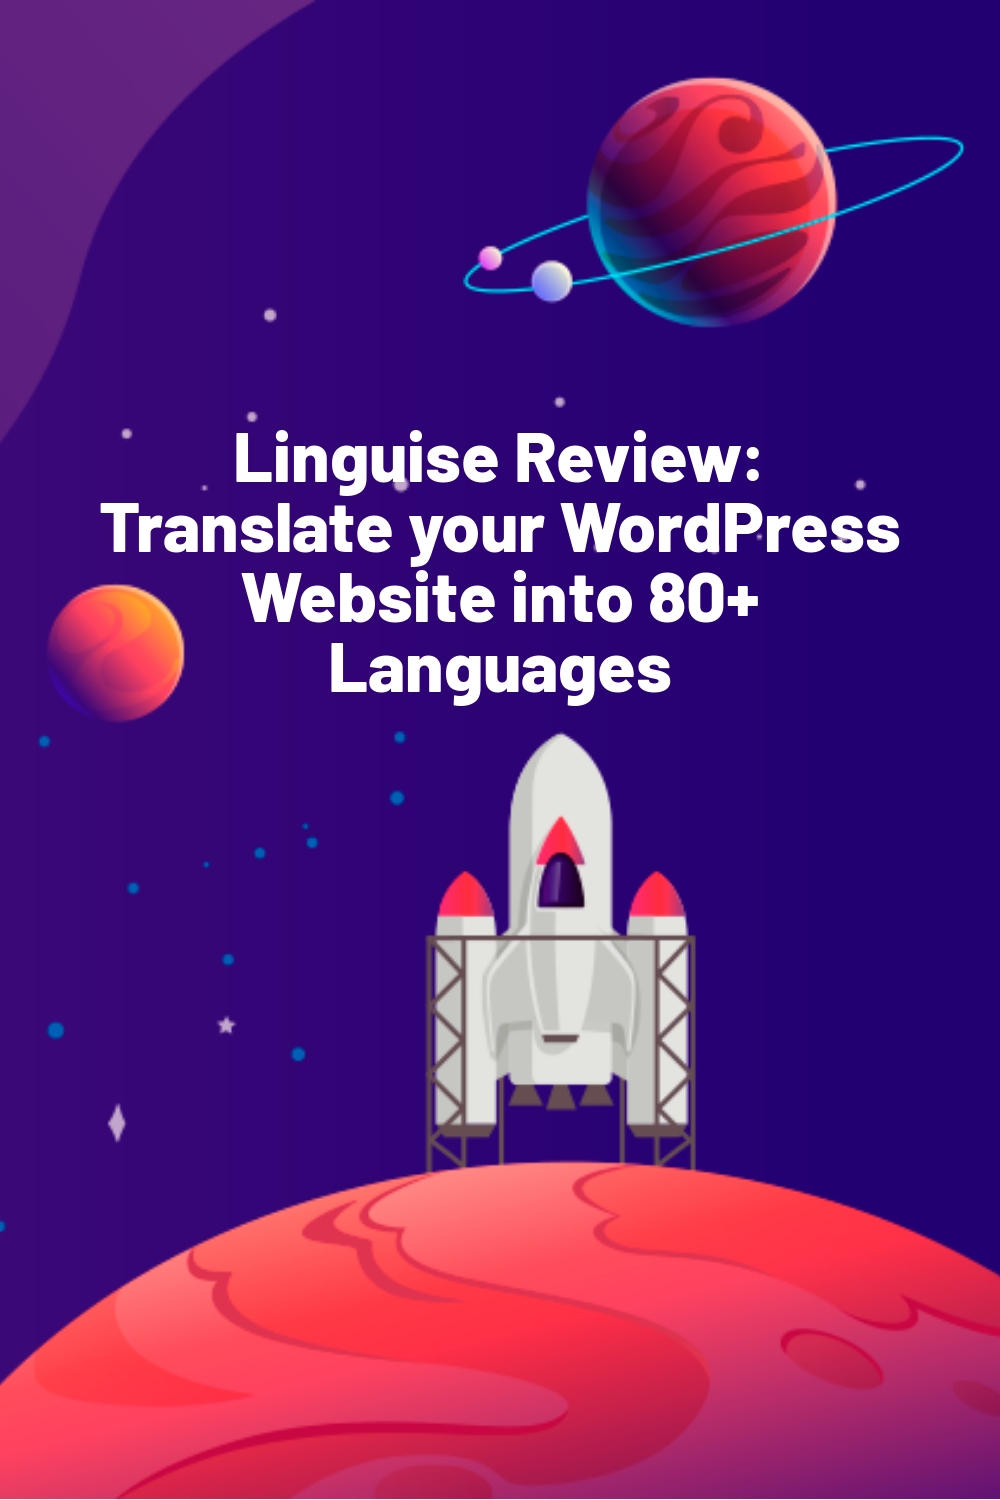 Linguise Review: Translate your WordPress Website into 80+ Languages